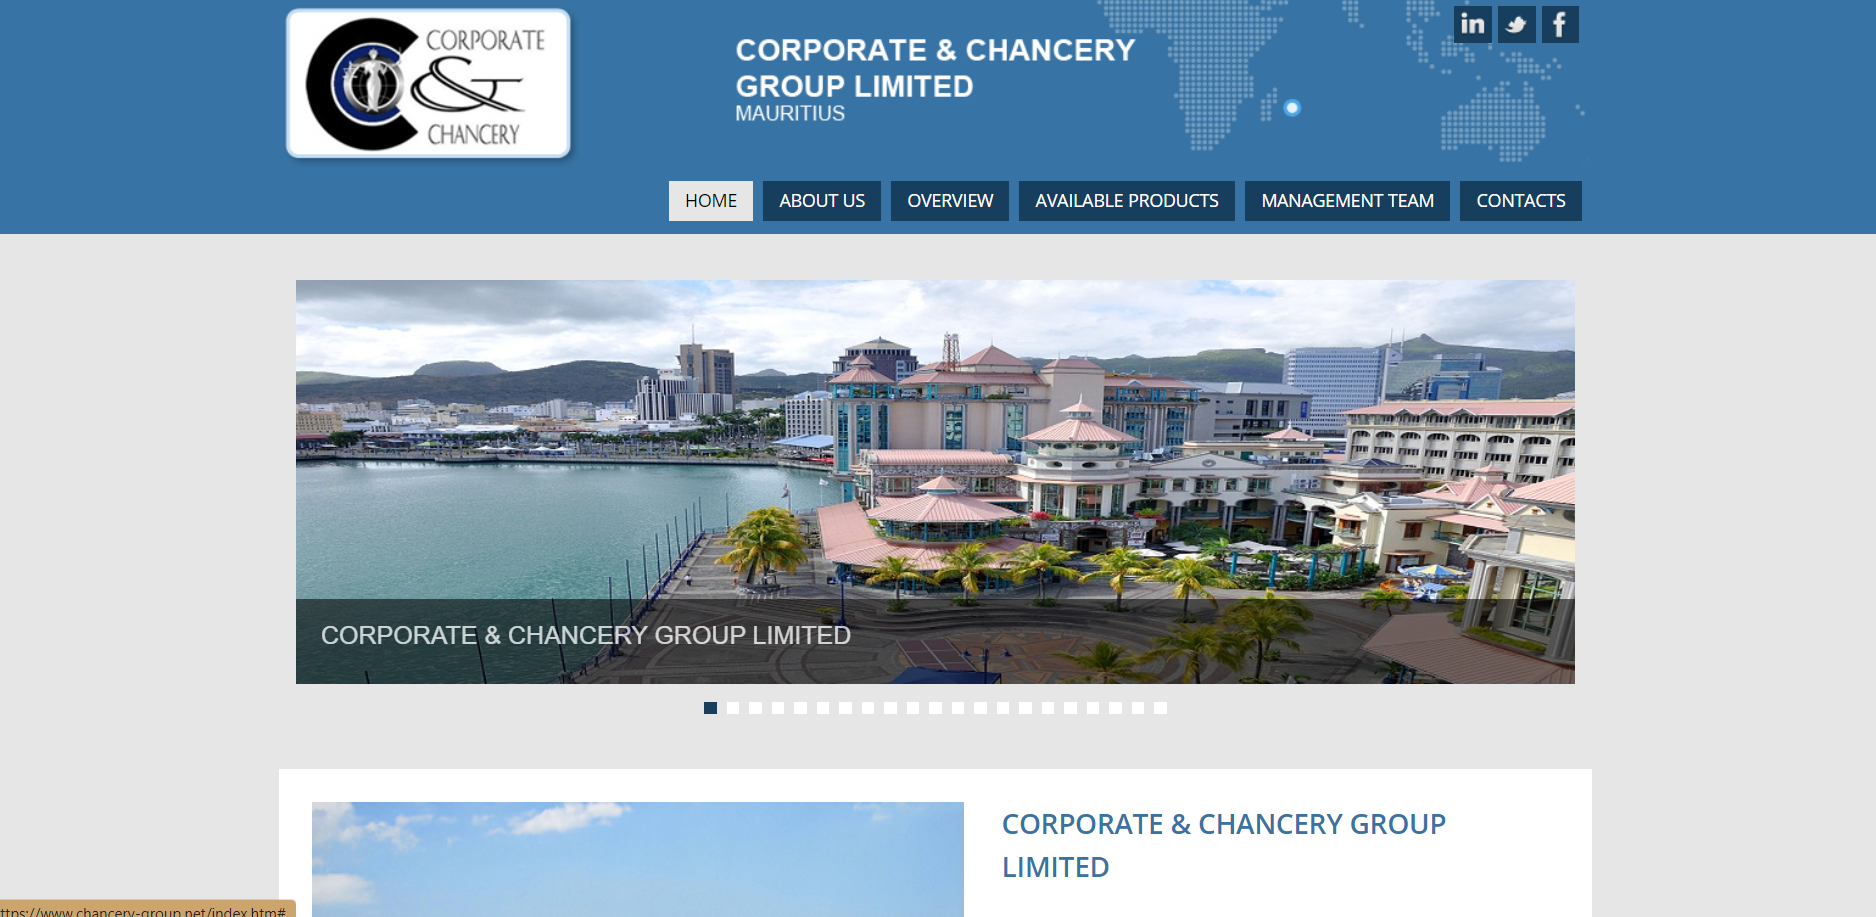 Corporate & Chancery Group’s website